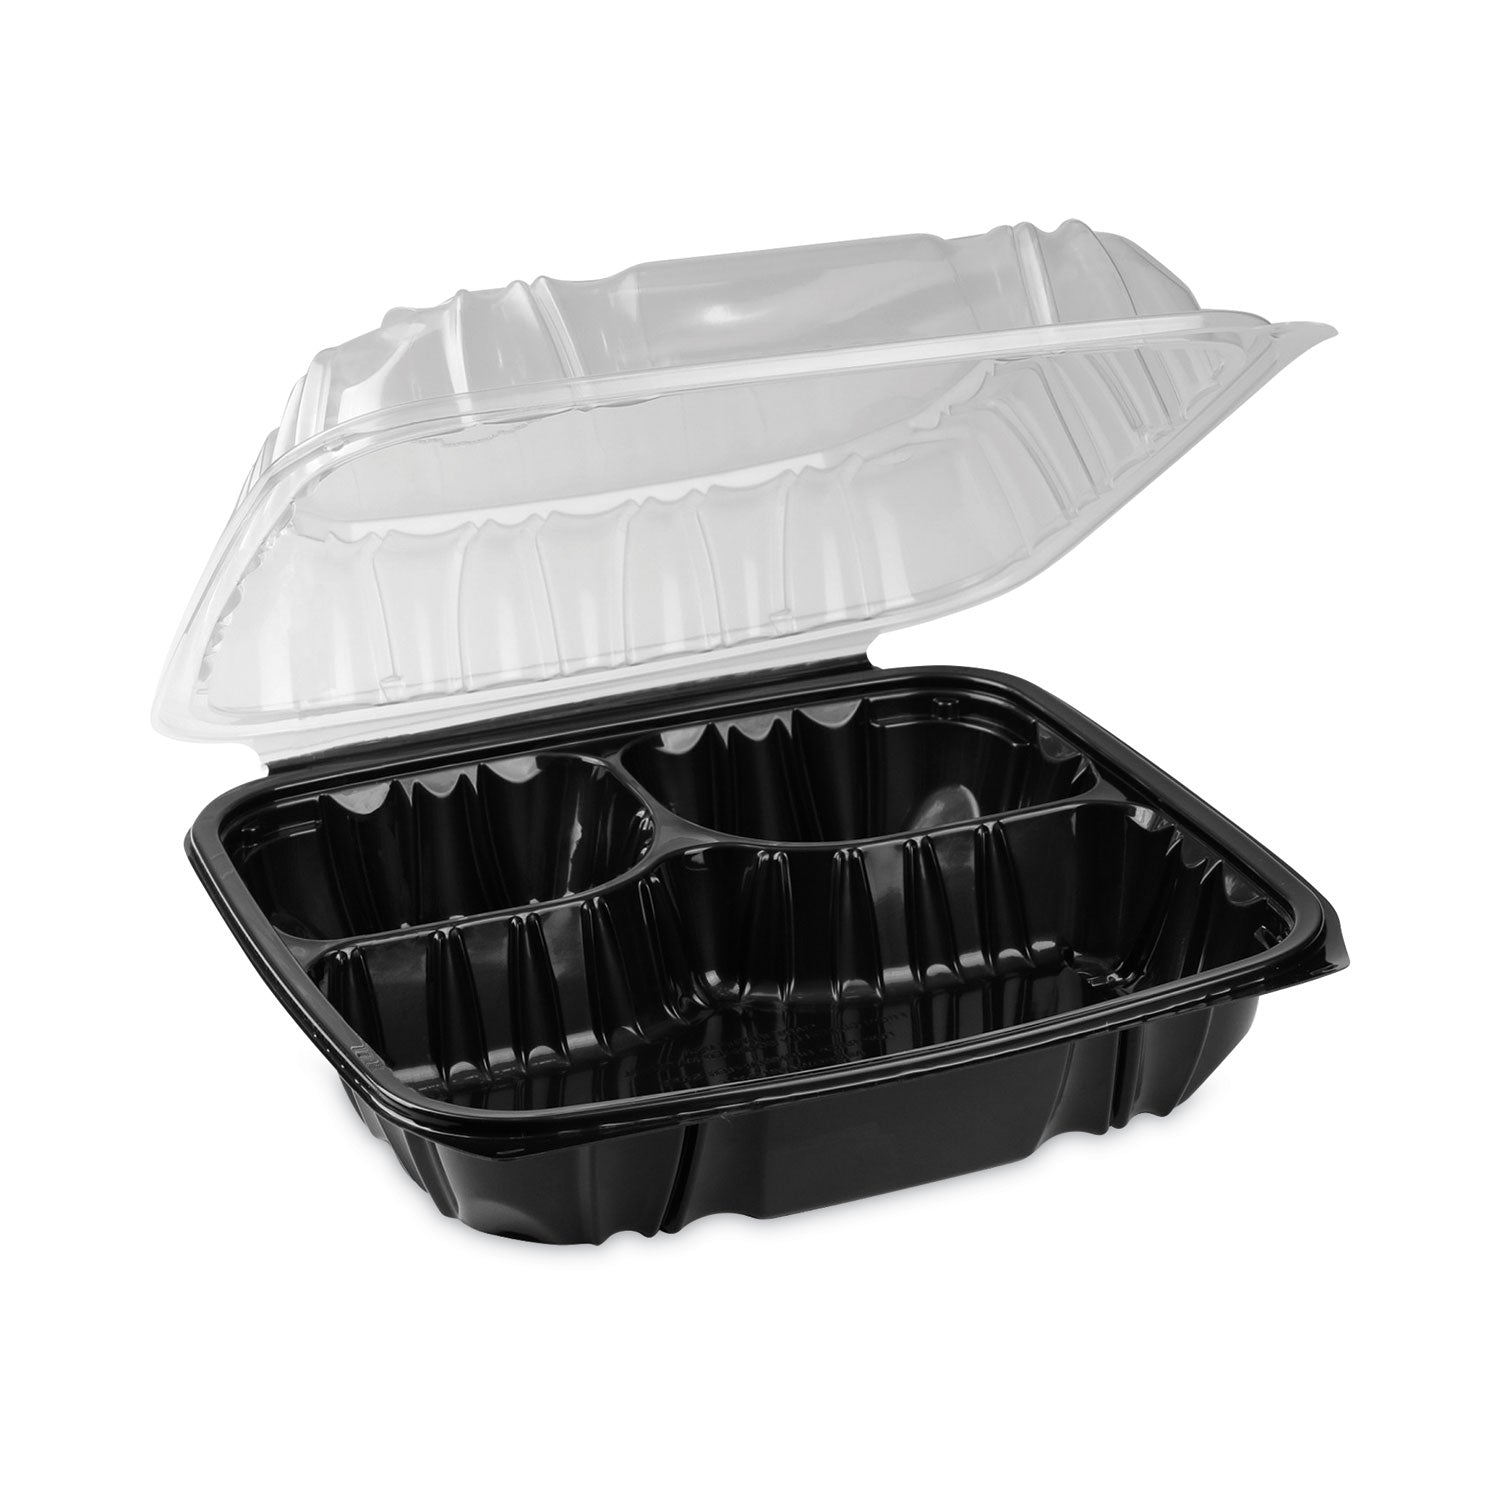 earthchoice-vented-dual-color-microwavable-hinged-lid-container-3-compartment-34oz-105x95x3-black-clear-plastic-132-ct_pctdc109310b000 - 2